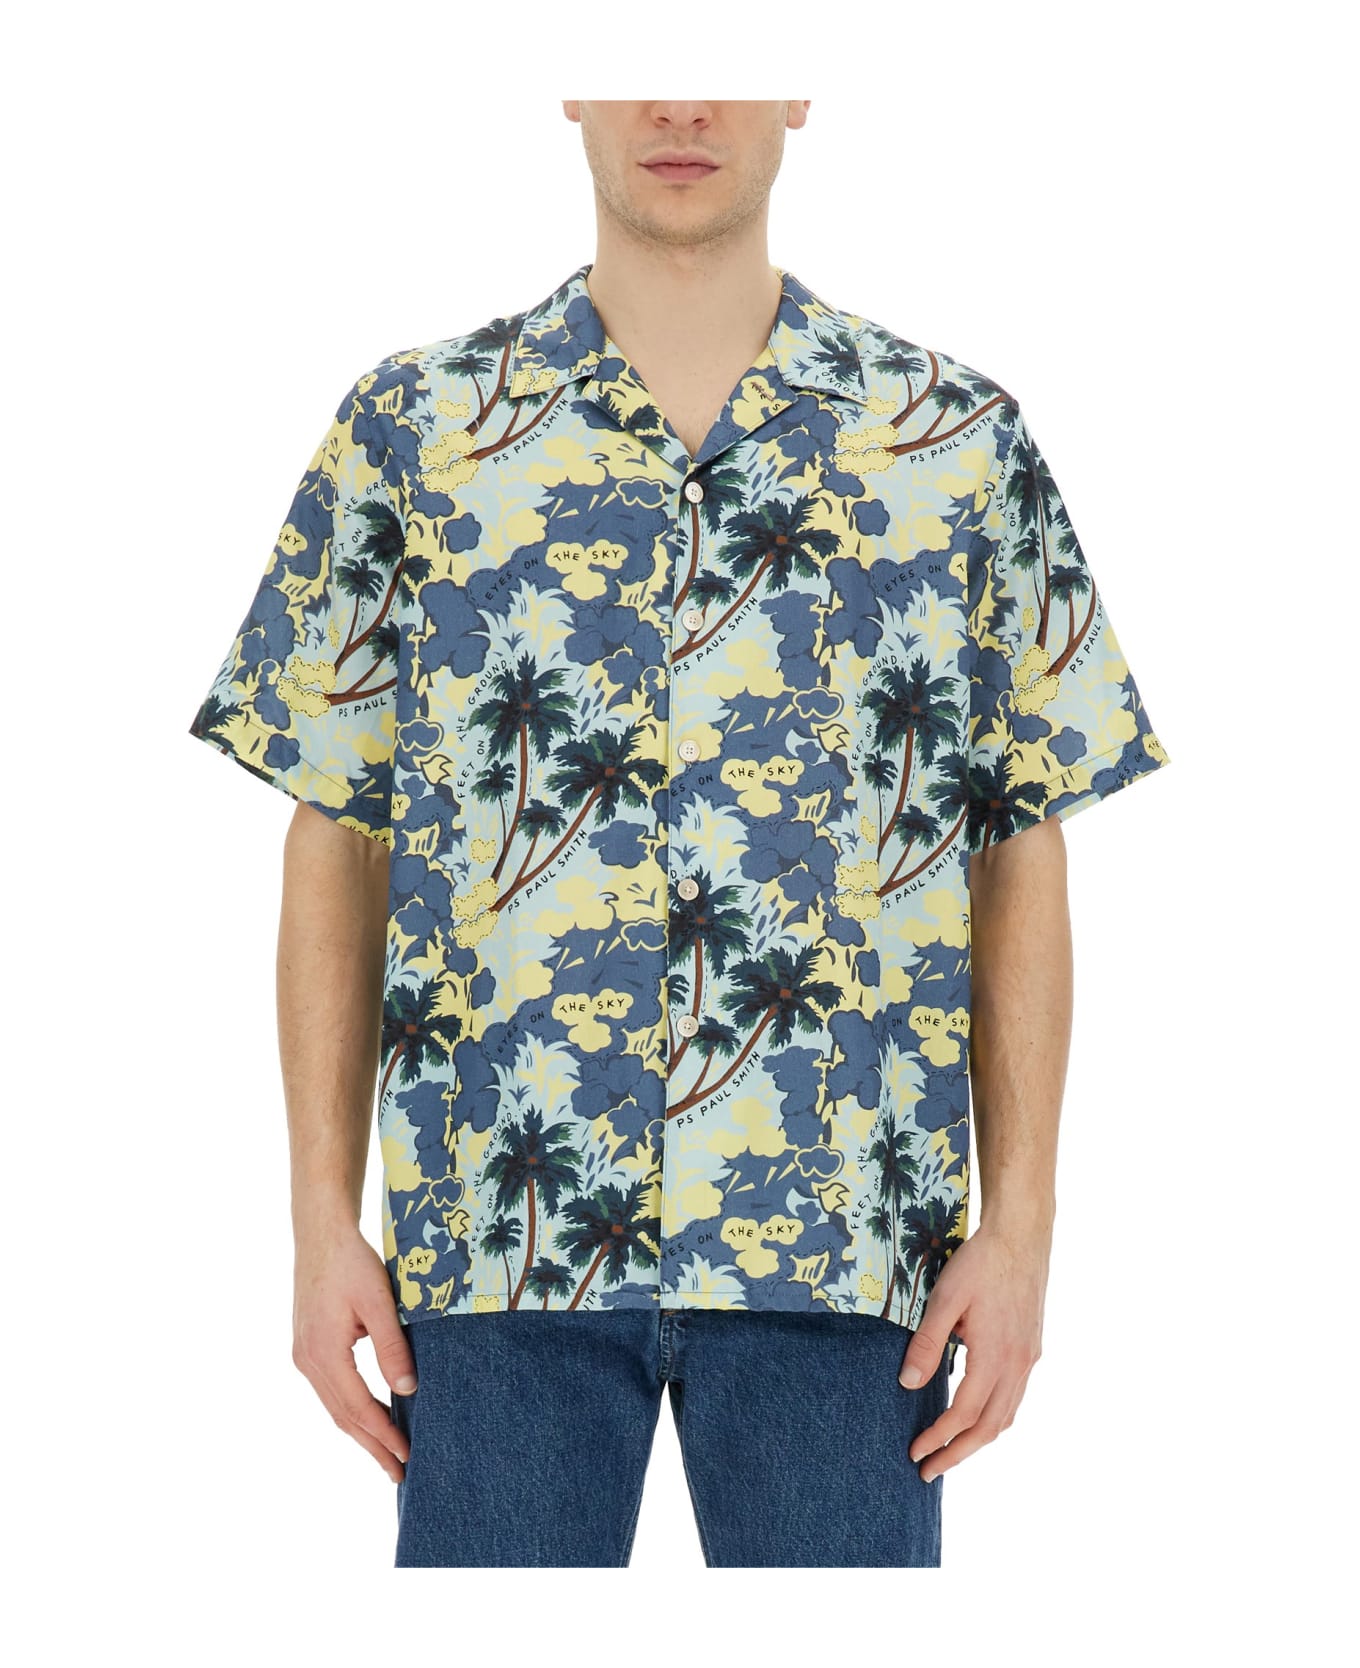 PS by Paul Smith Printed Shirt - Celeste